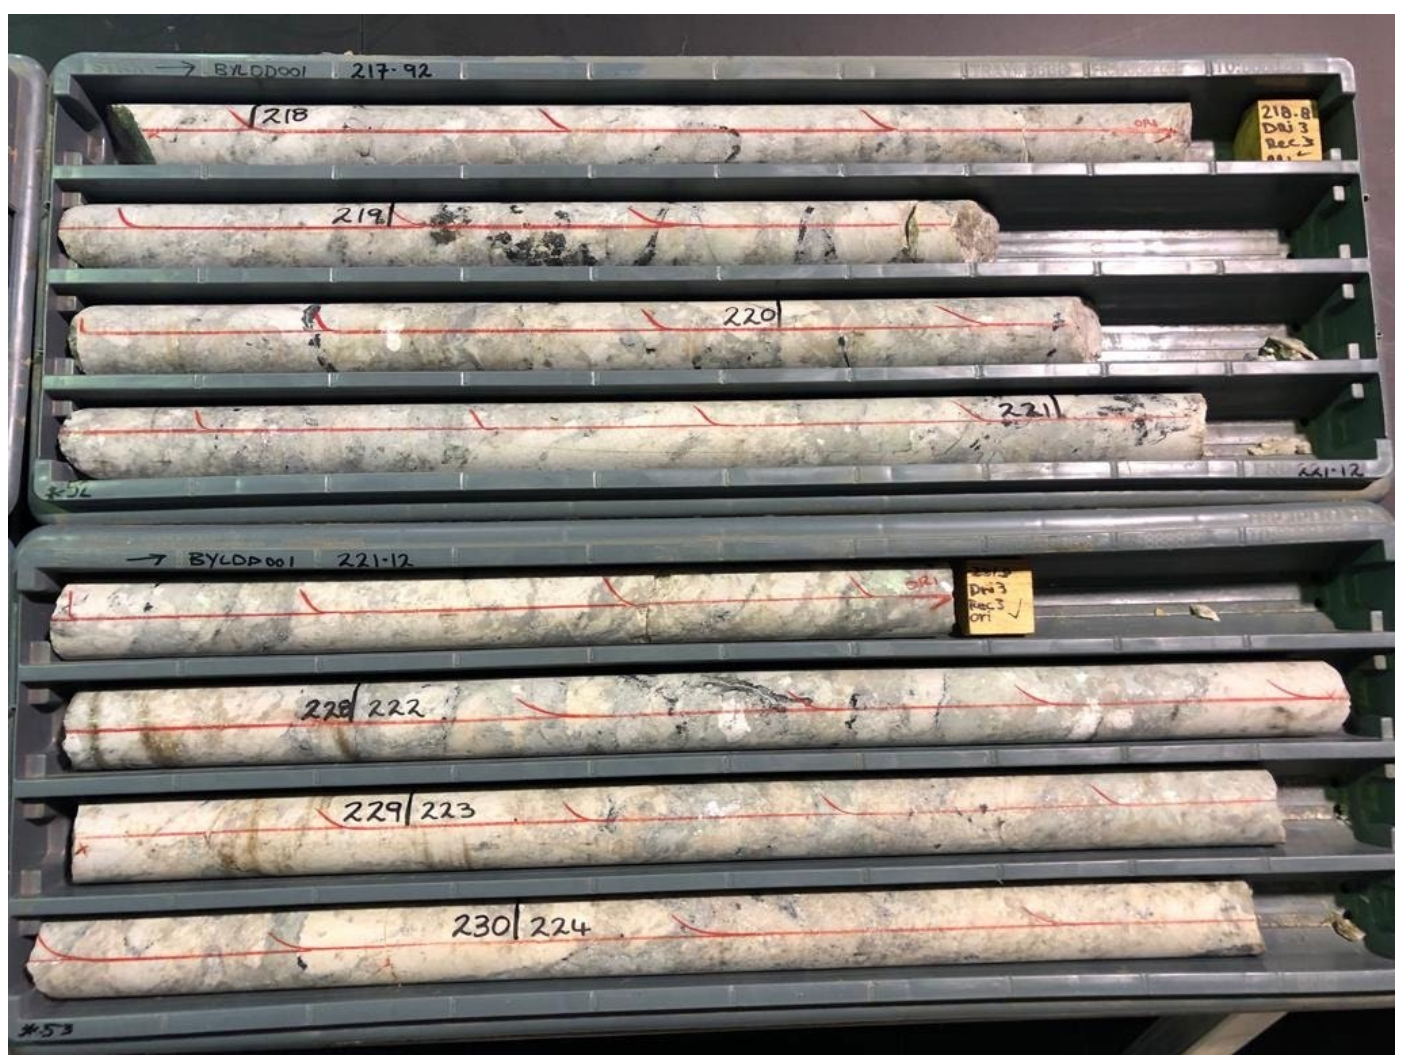 A look at the core in question pulled from downhole BYLDD001